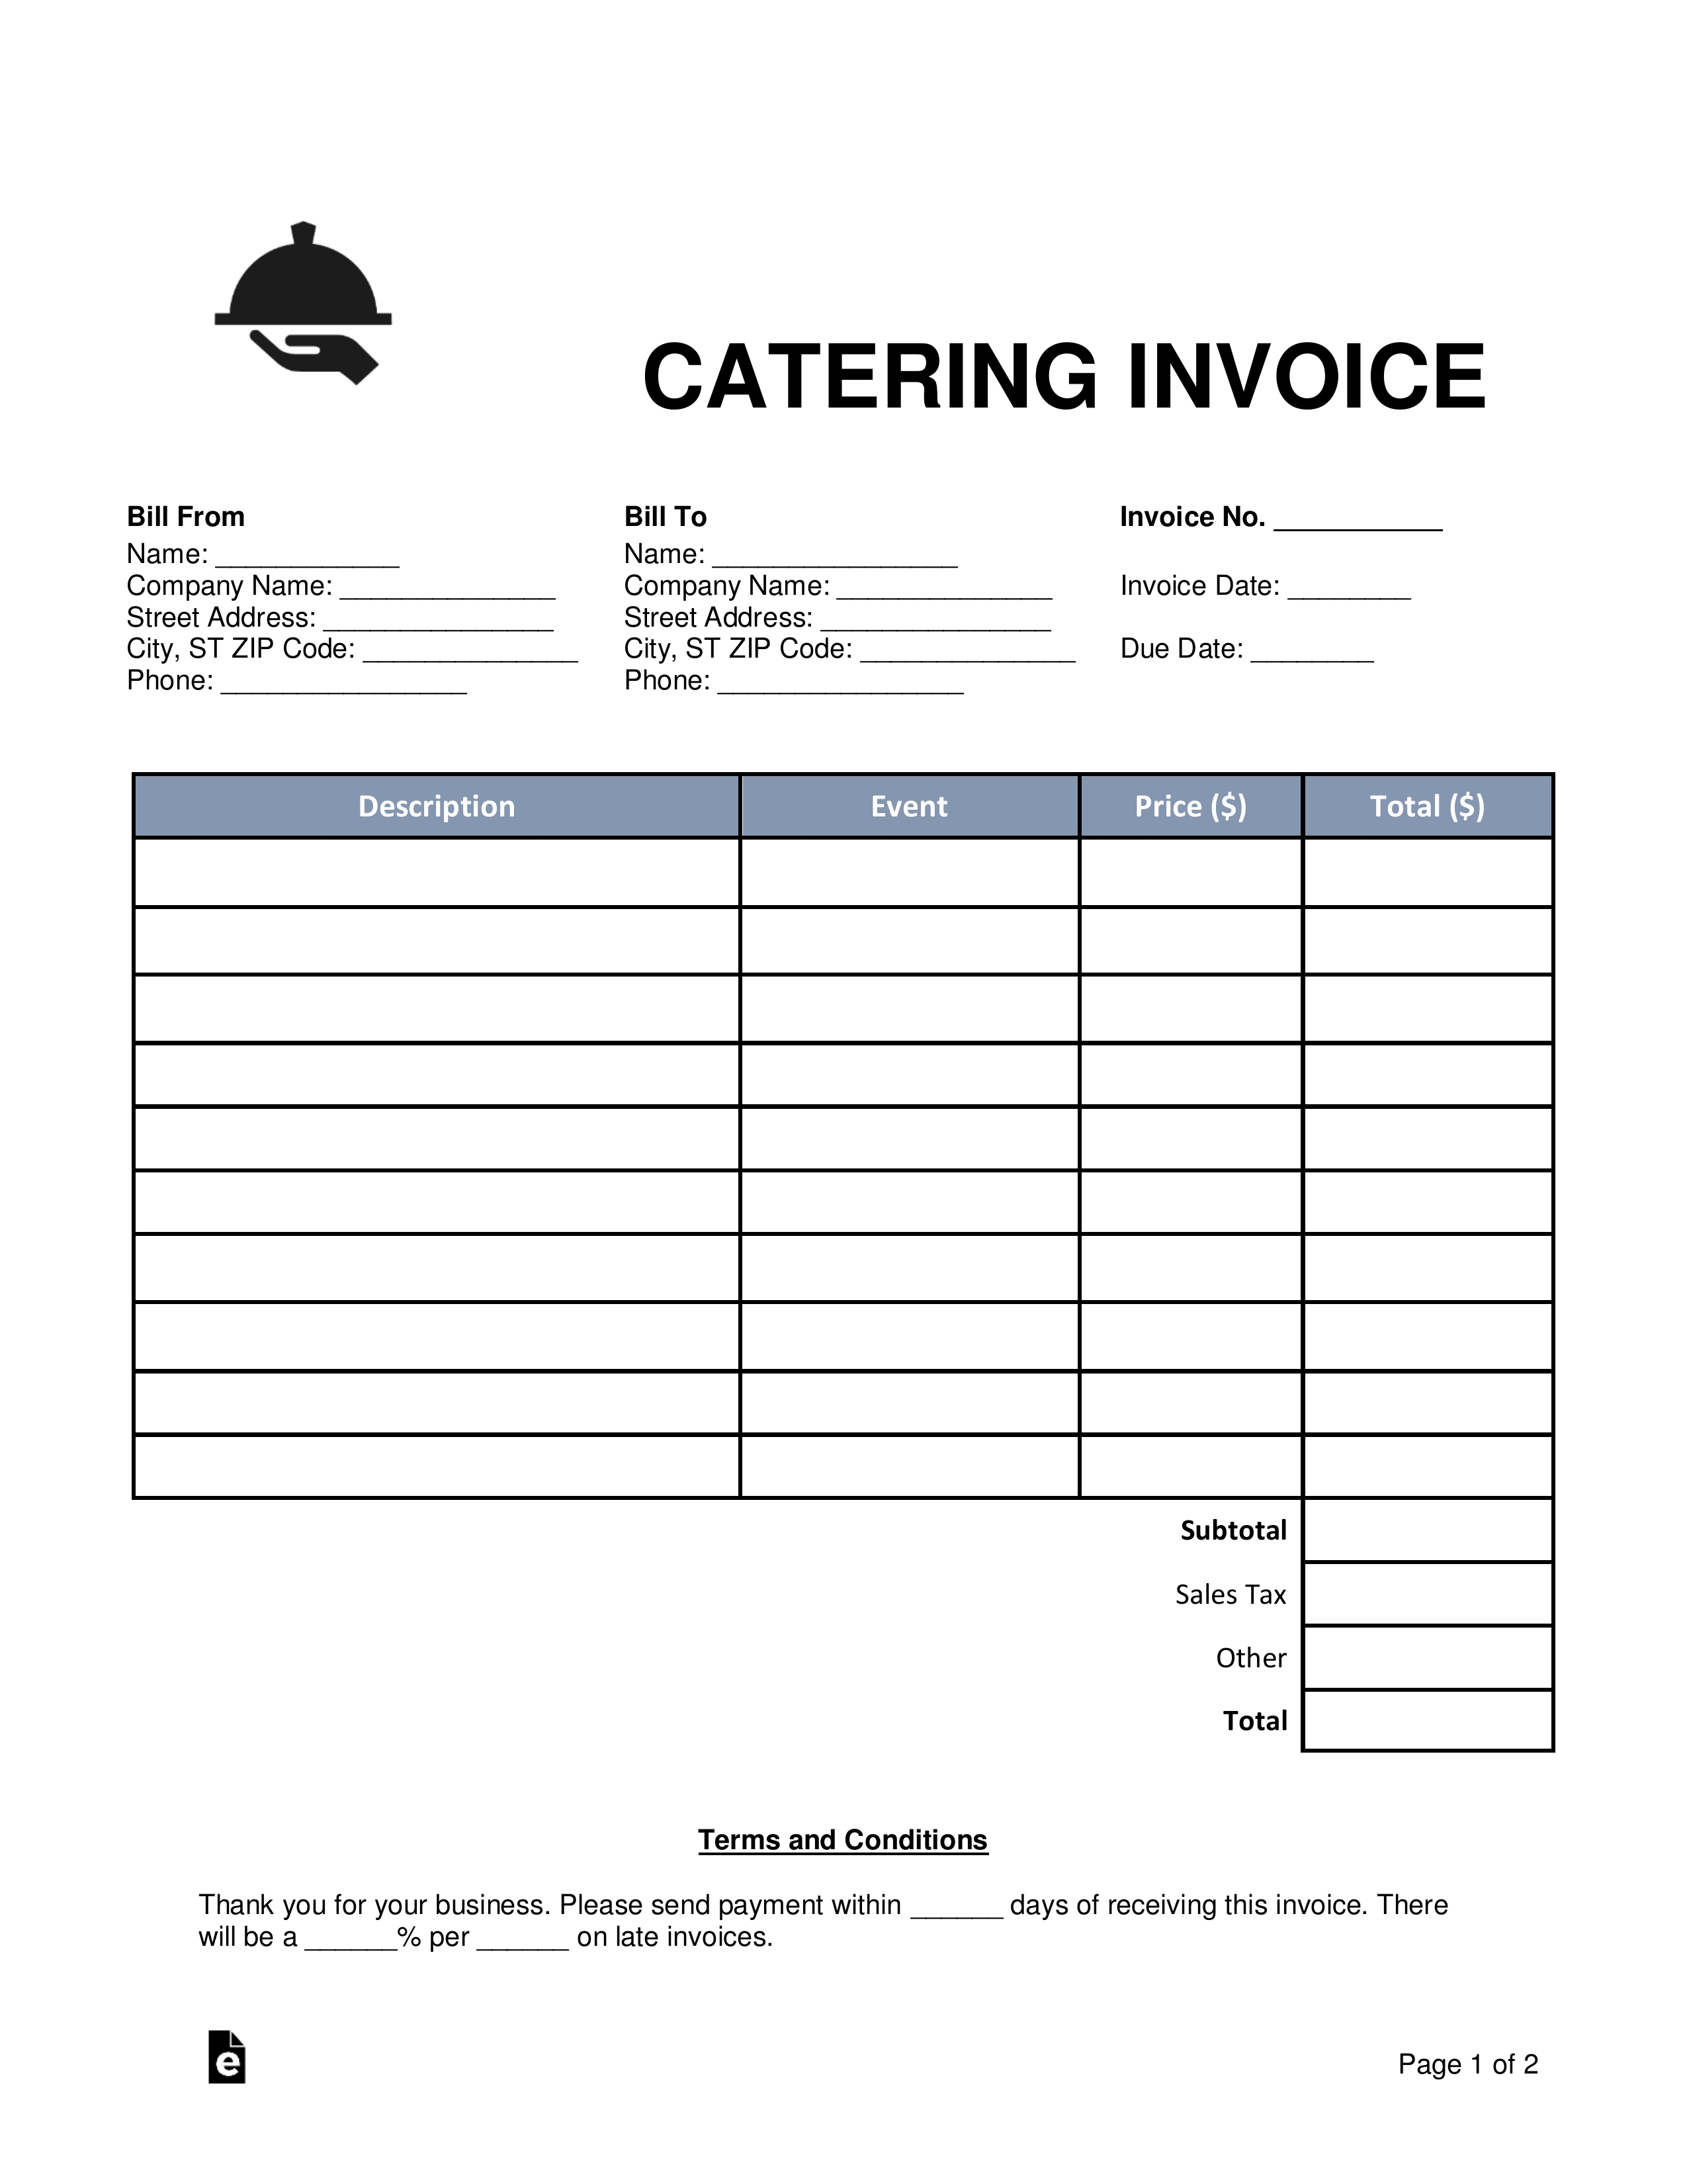 Sample Of Catering Invoice